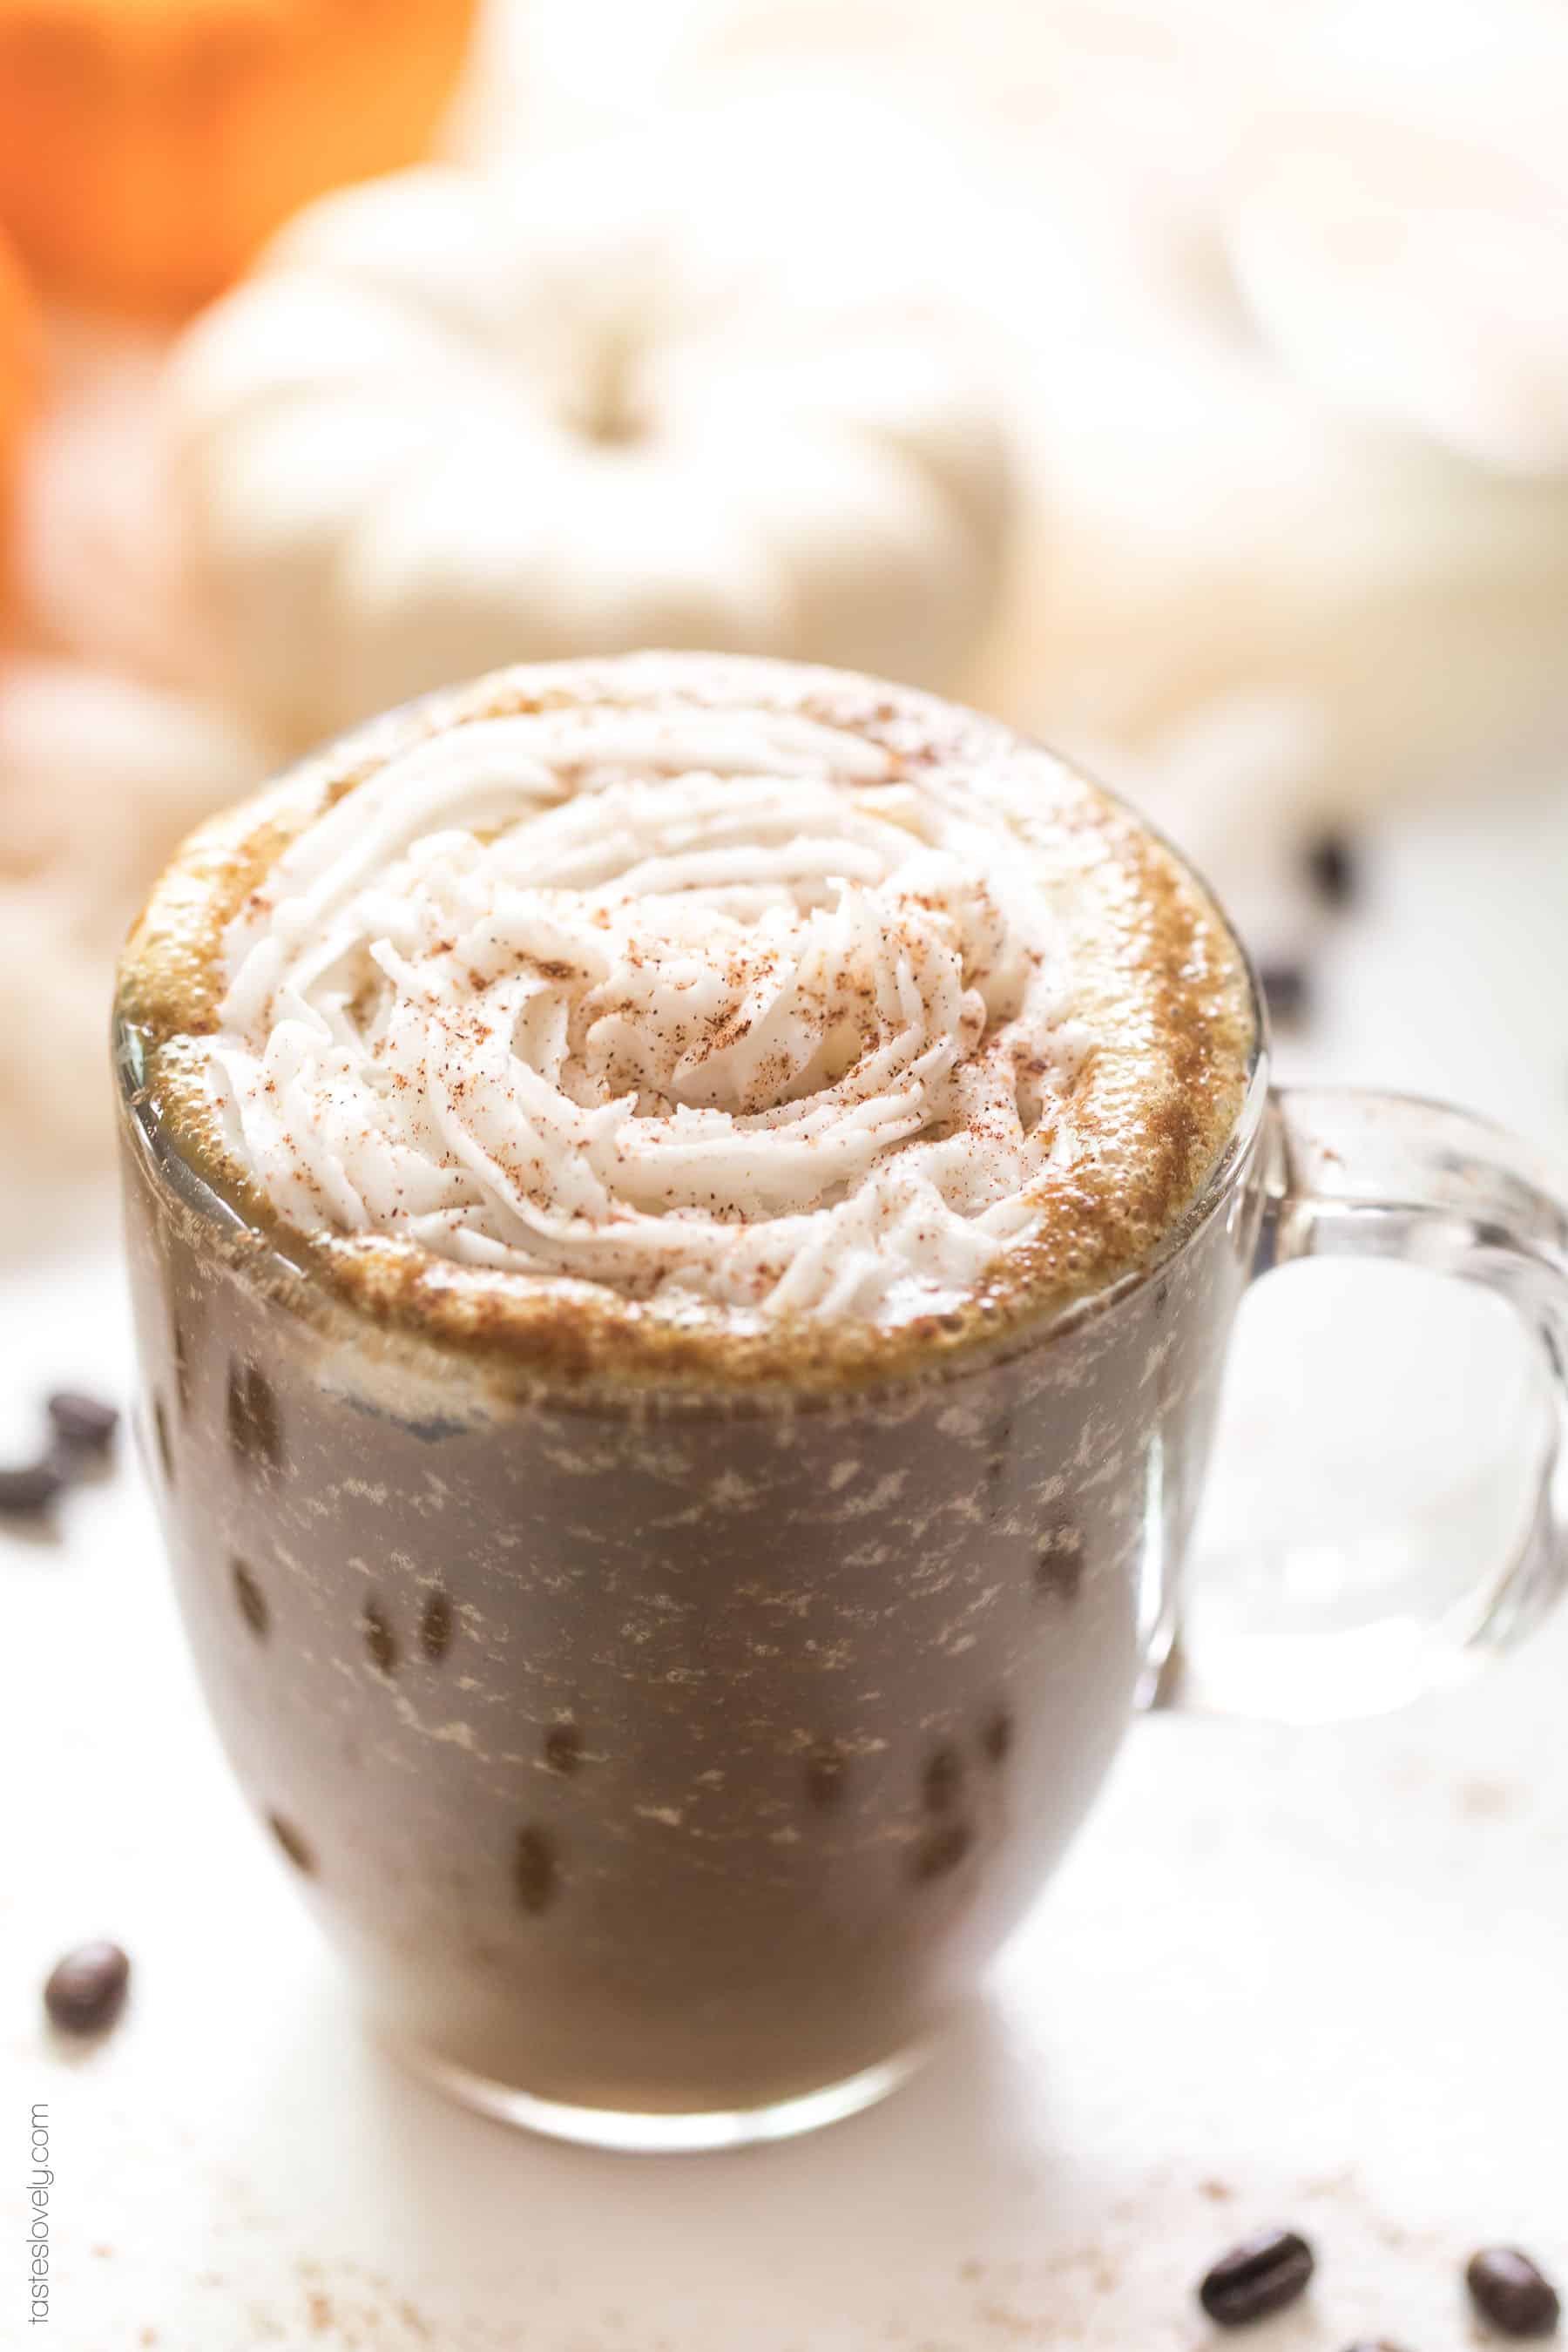 Paleo & Whole30 Pumpkin Spice Latte - sweetened naturally with dates and flavored with real pumpkin puree. Made in a blender, no fancy coffee machines needed! Paleo, Whole30, dairy free, sugar free, gluten free, vegan, clean eating.